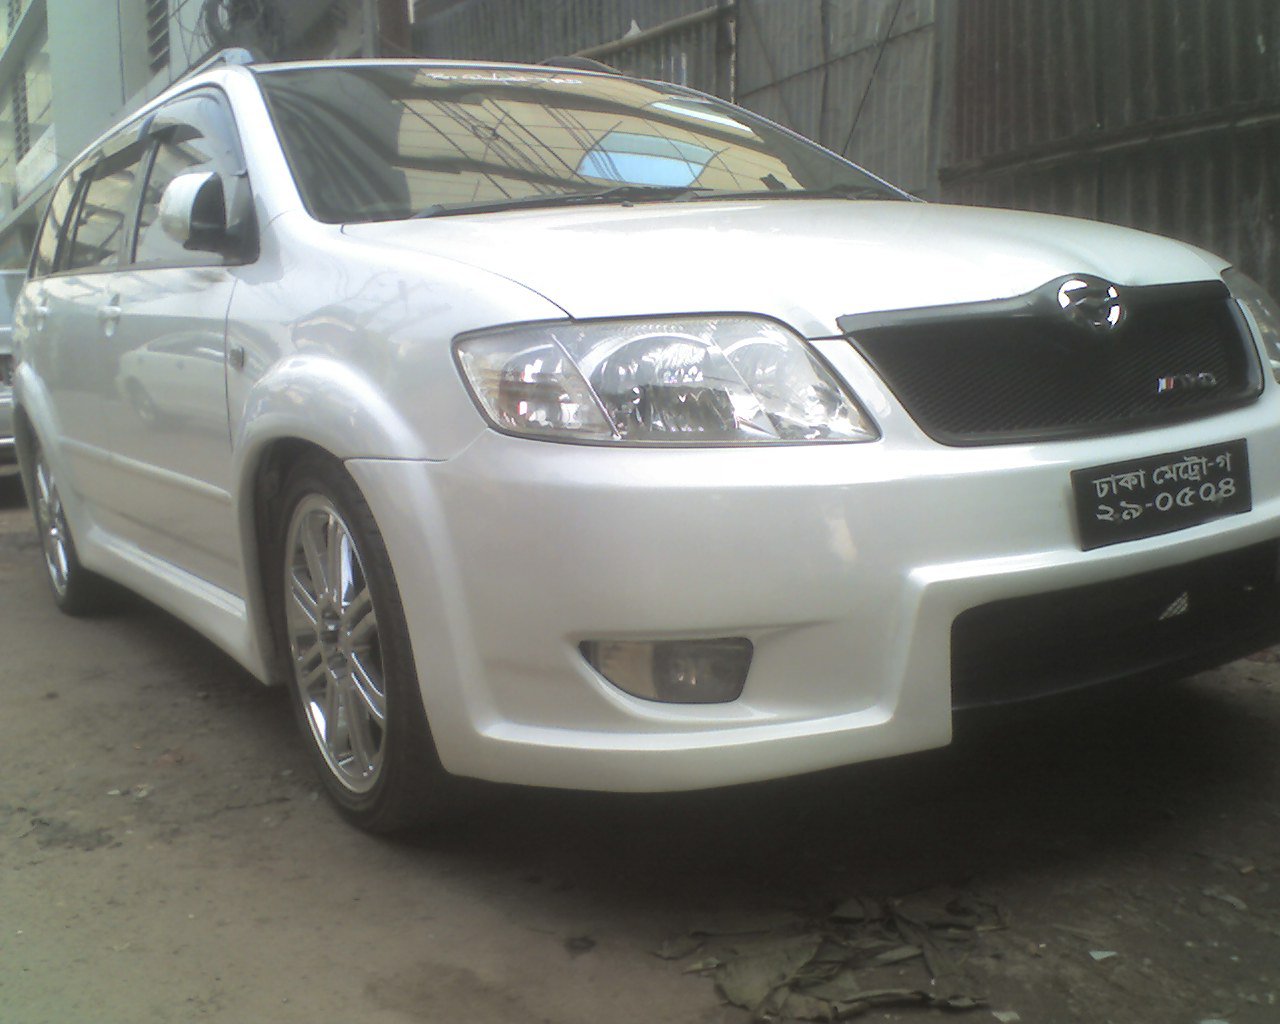 MODIFIED TOYOTA FIELDER 2004 large image 3